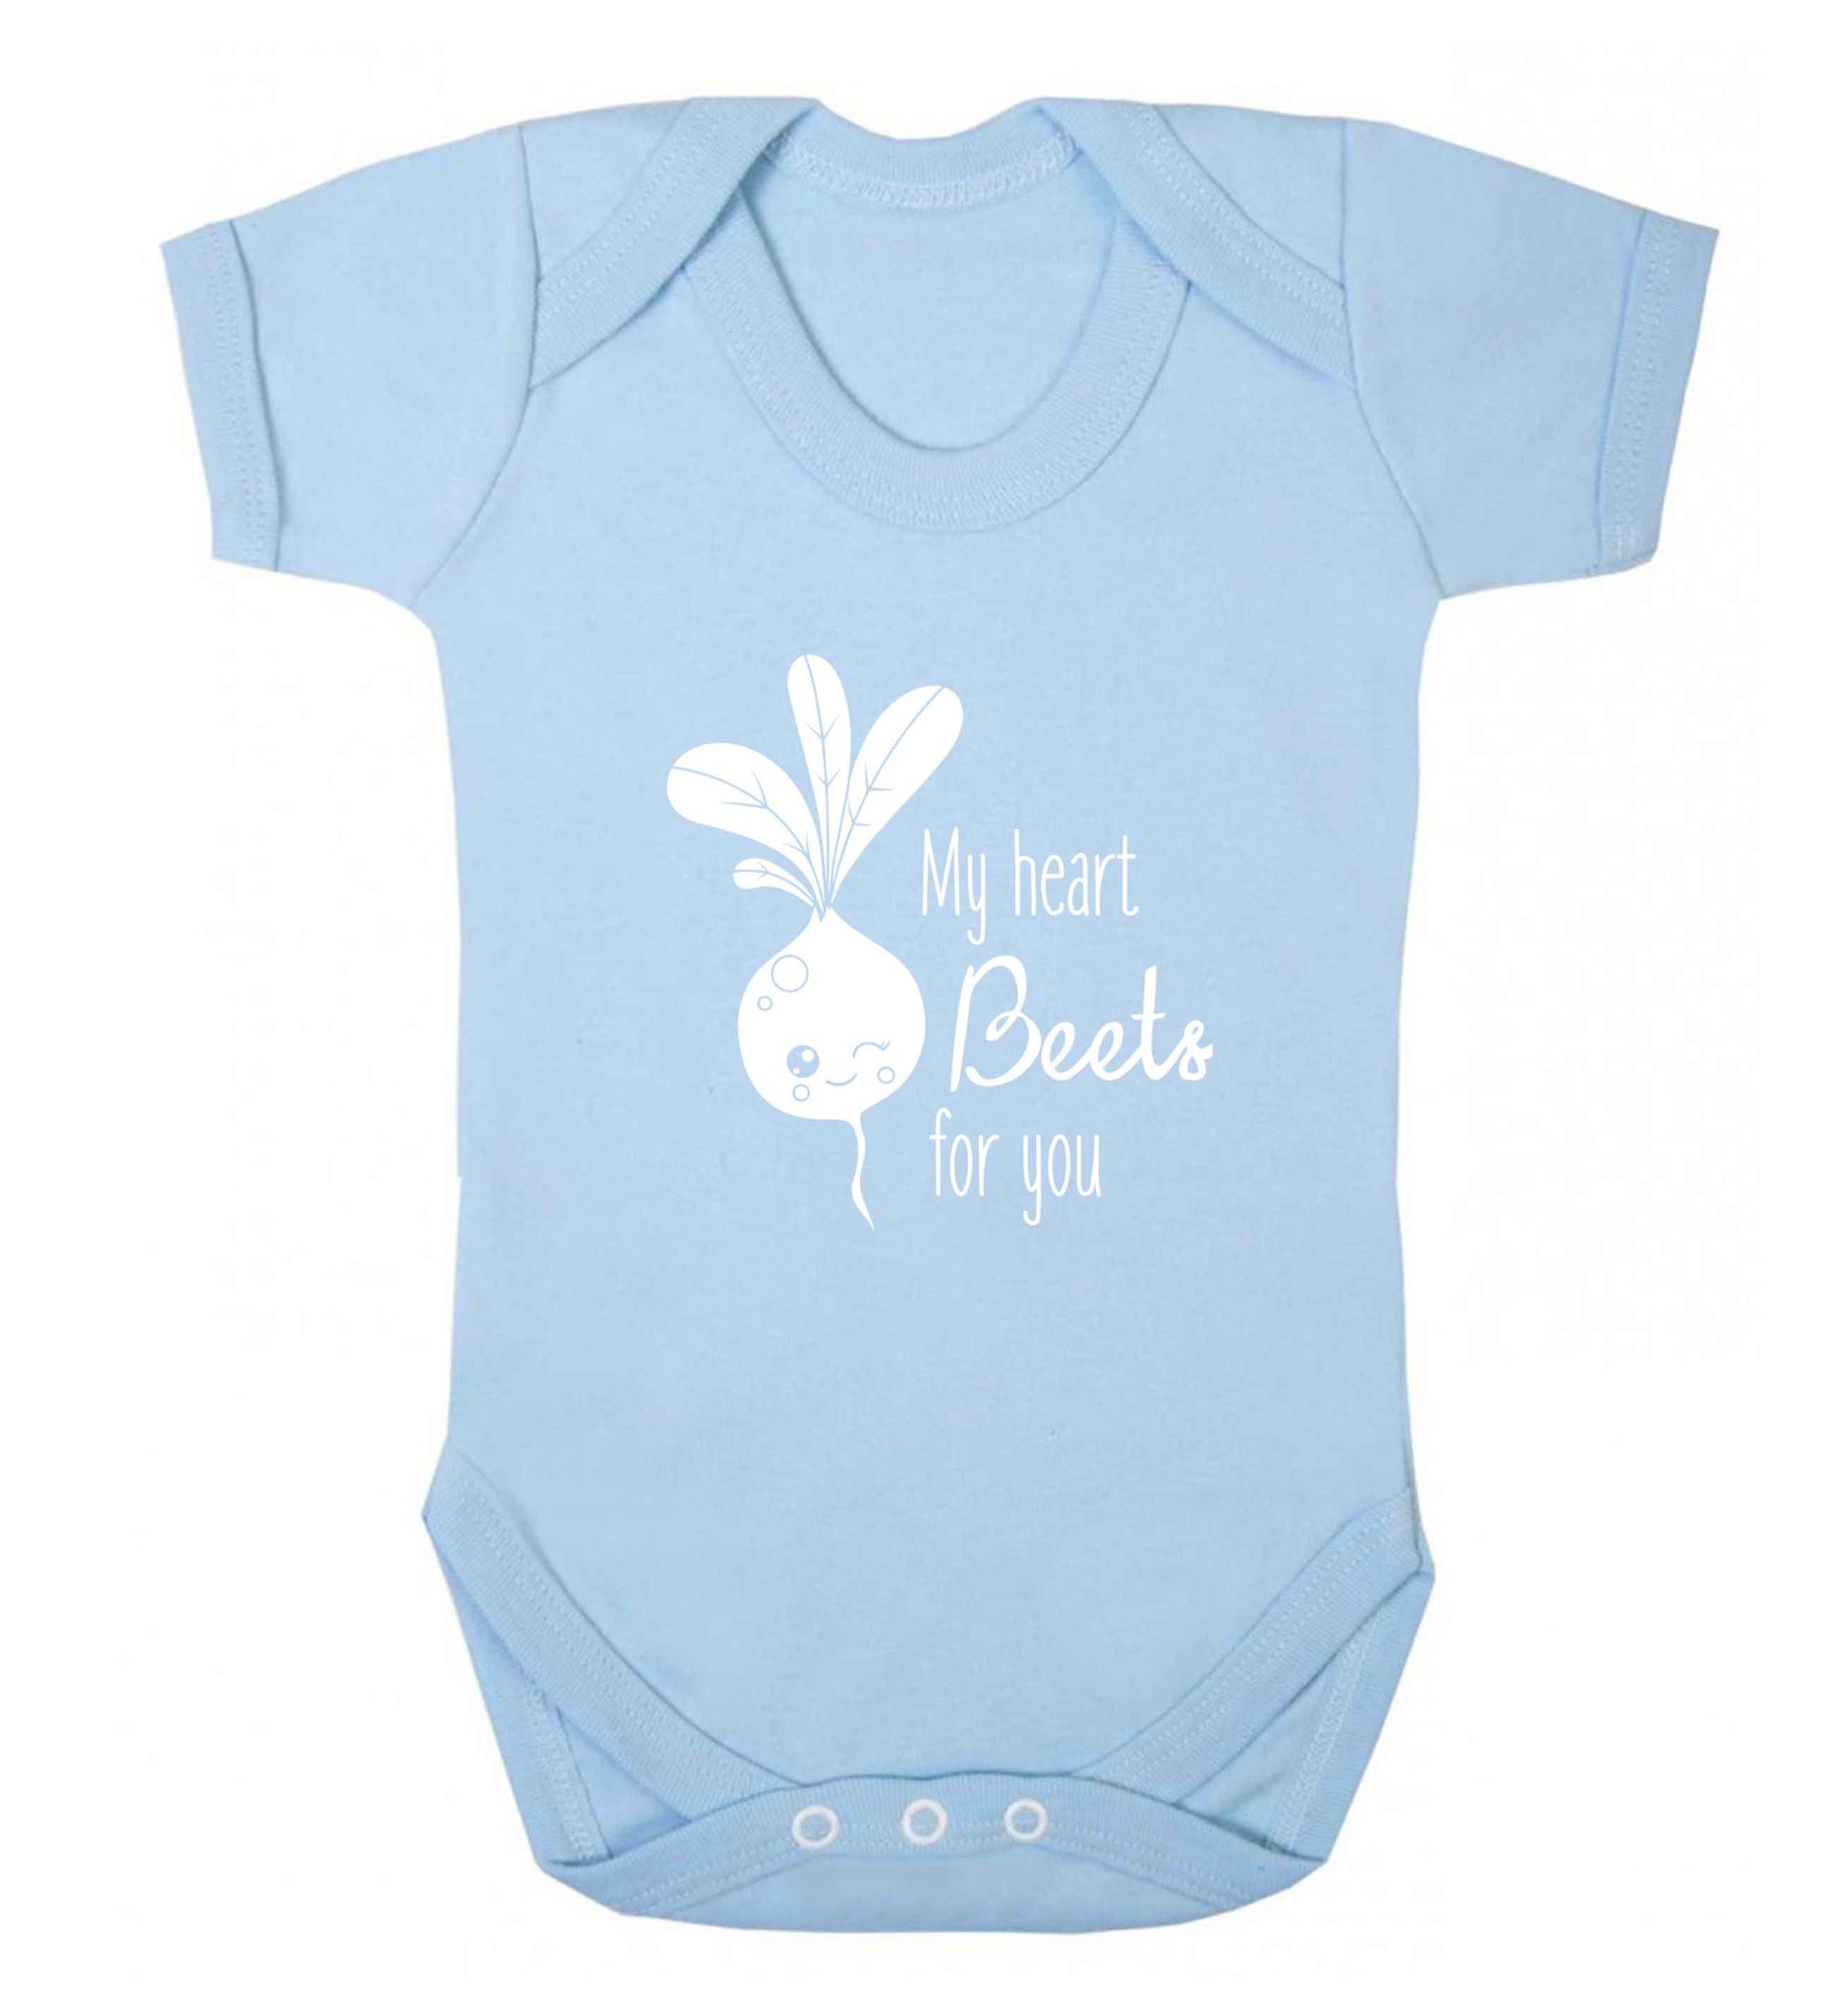 My heart beets for you baby vest pale blue 18-24 months